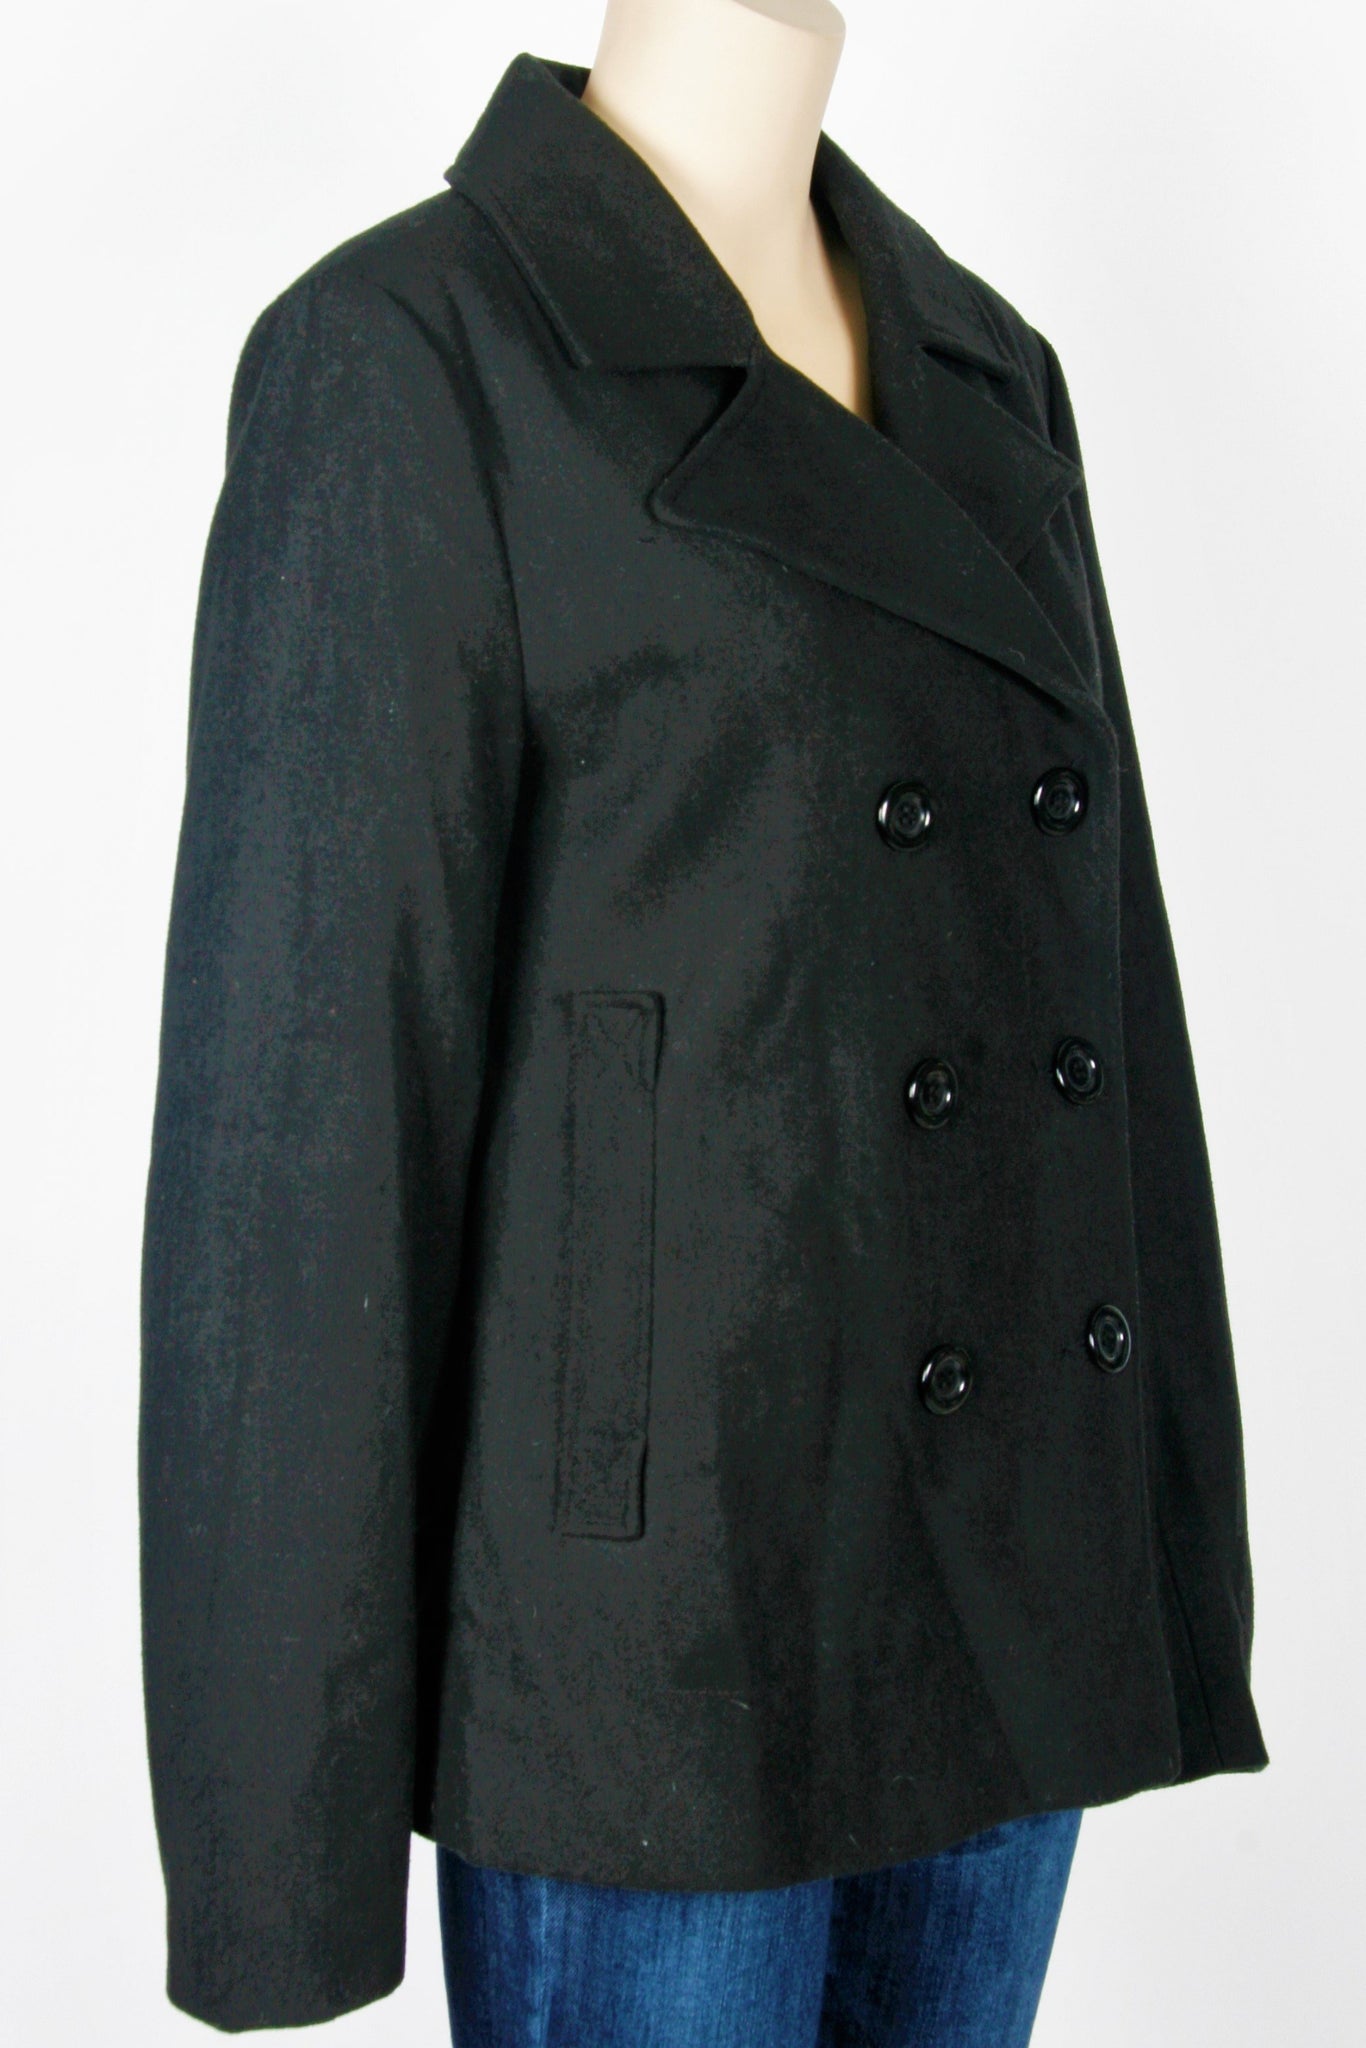 NWOT Ambiance Apparel Black Peacoat-Size Large – Second Bite